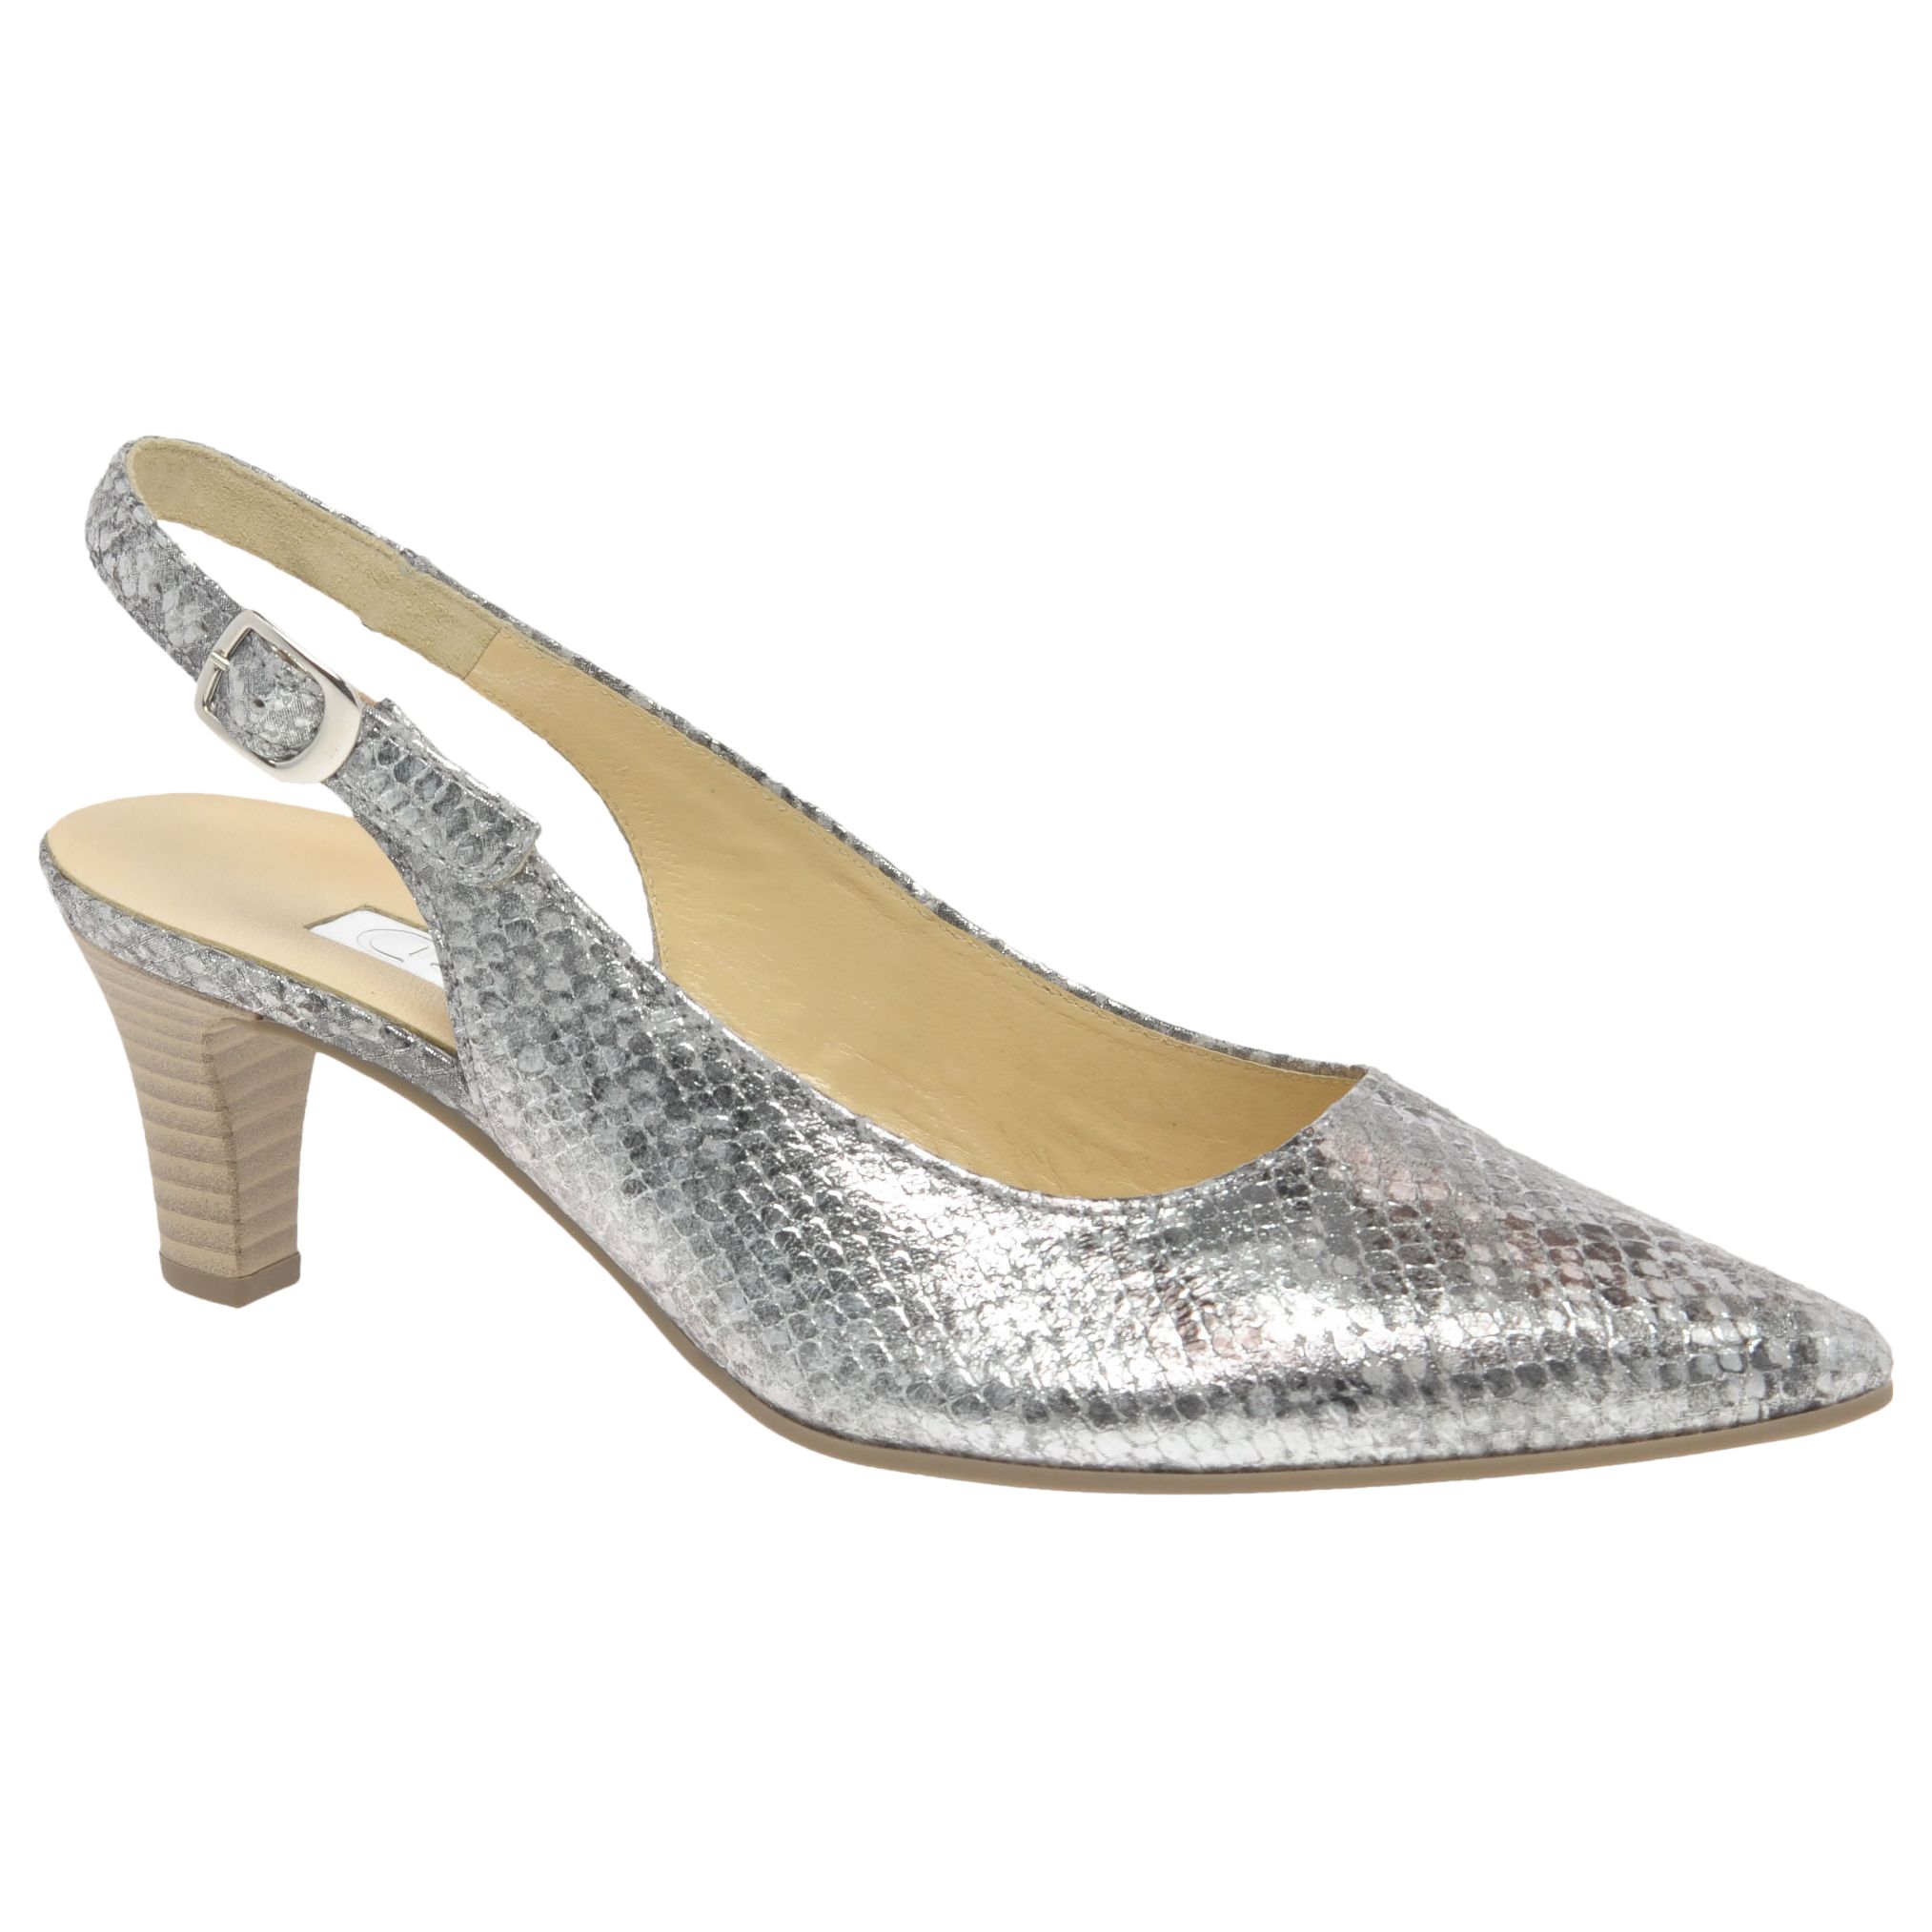 Gabor Hume 2 Slingback Court Shoes at John Lewis